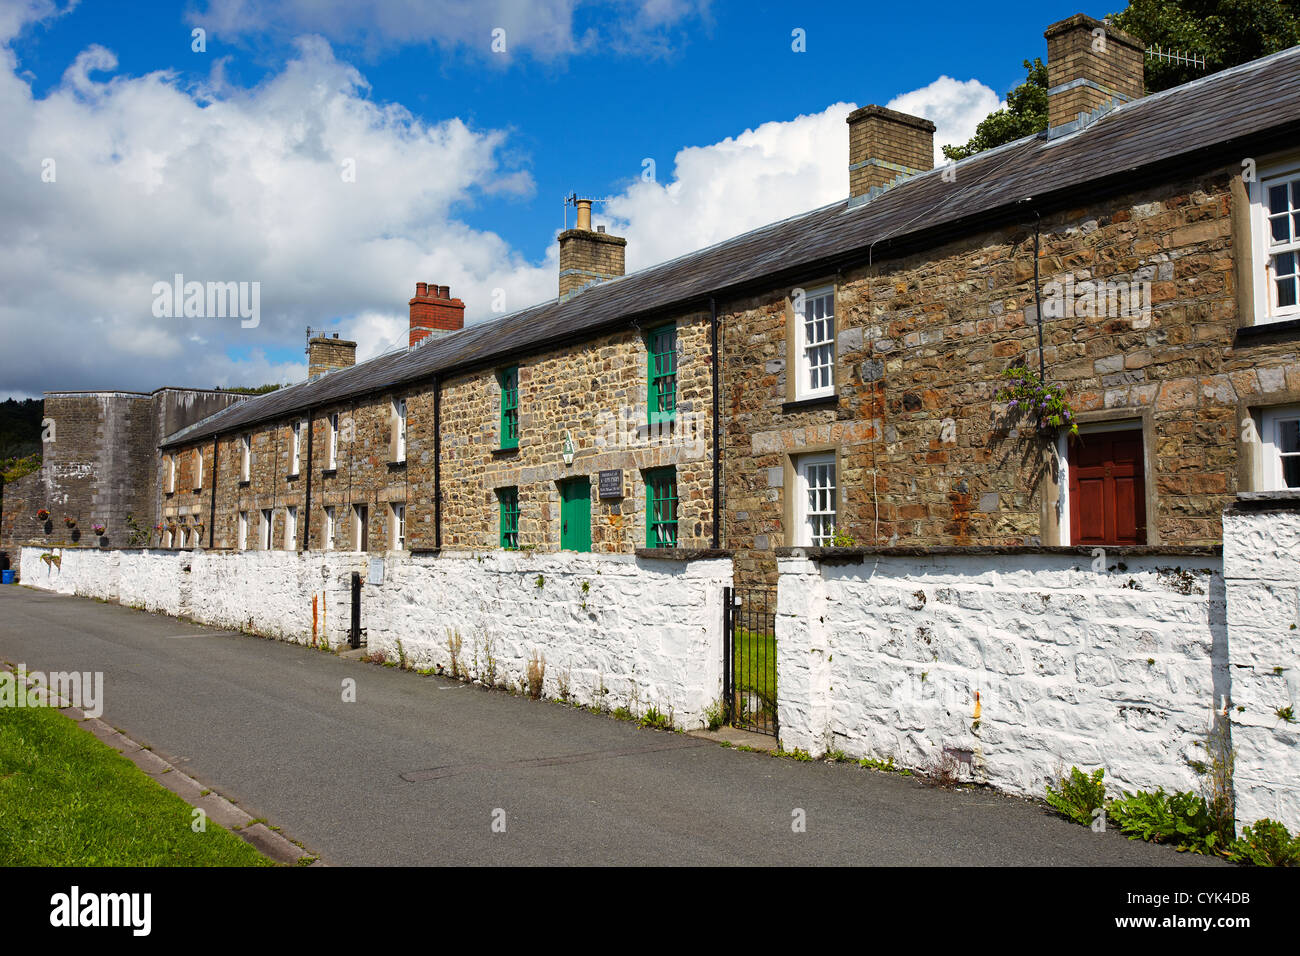 Birthplace of the composer Joseph Parry, Merthyr Tydfil, Wales, UK Stock Photo